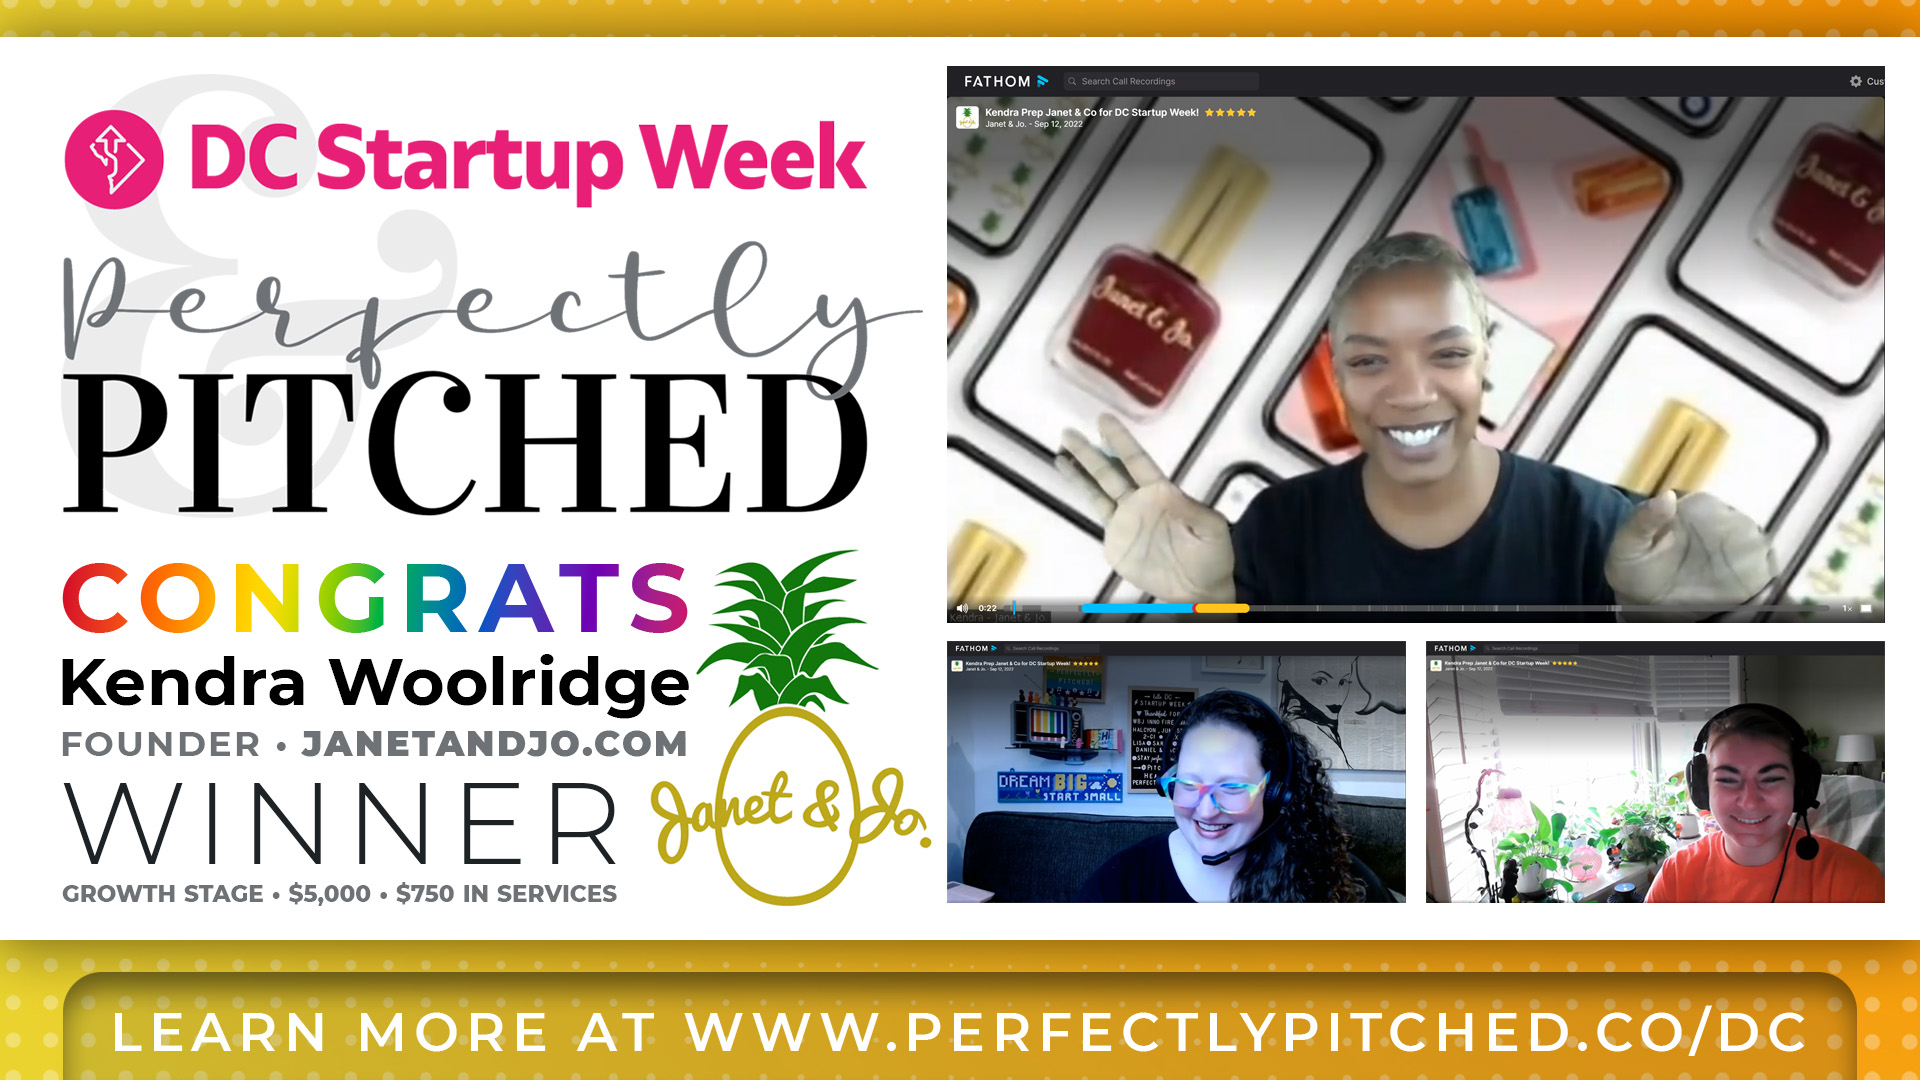 A collage showing screenshots from a zoom pitch coaching session with Kendra Woolridge, founder of JanetAndJo.com, and the team from Perfectly Pitched, Heather & Sarah. It also shows the logos of DC Startup Week & Perfectly Pitched, who congratulate Kendra on winning the growth stage pitch competition!